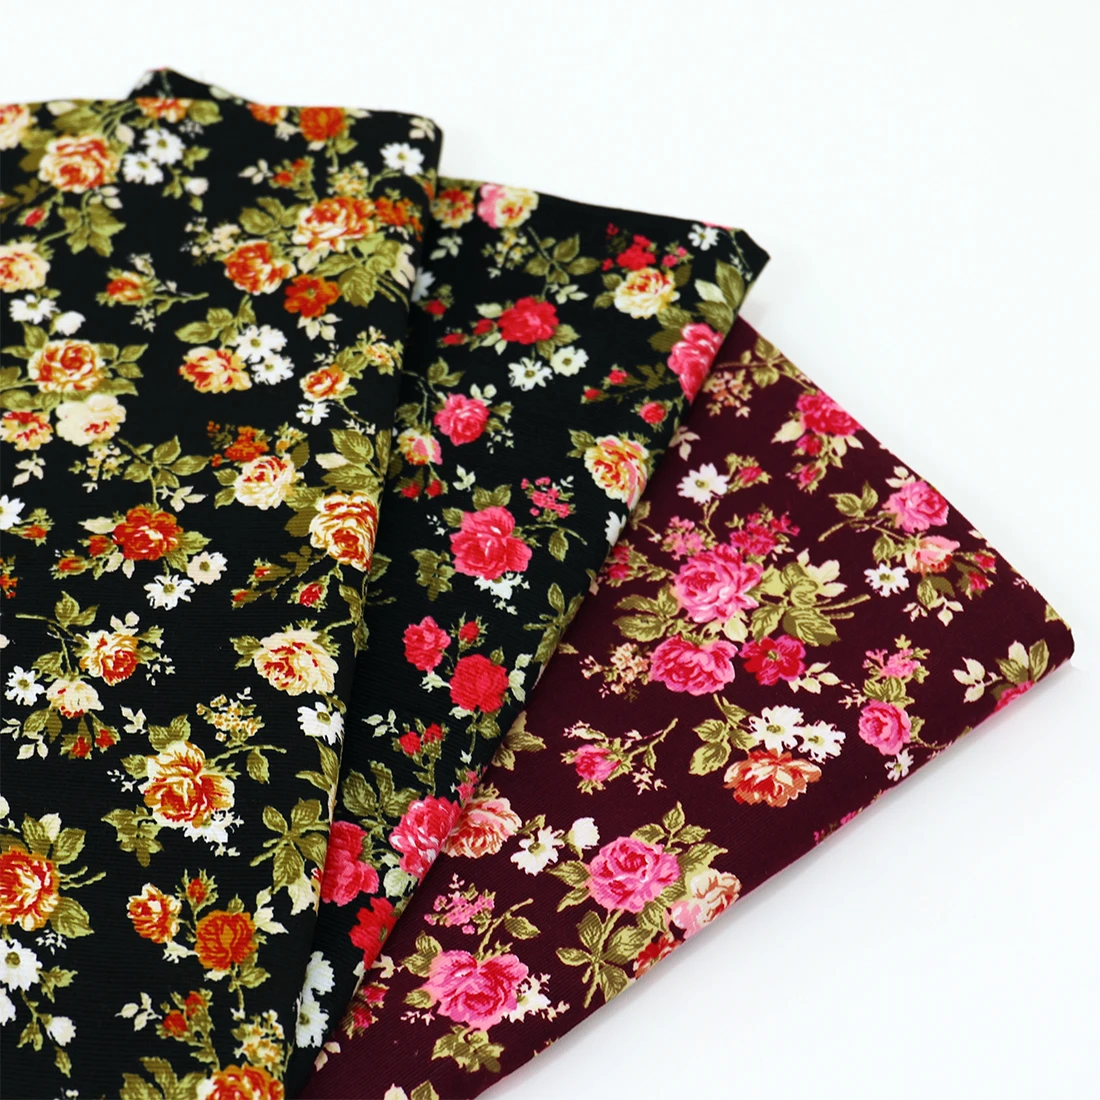 100% Cotton Stripe Rose Print Corduroy Fabric For Making Sewing Dress Coat Clothes Floral Cloth By The Half Meter